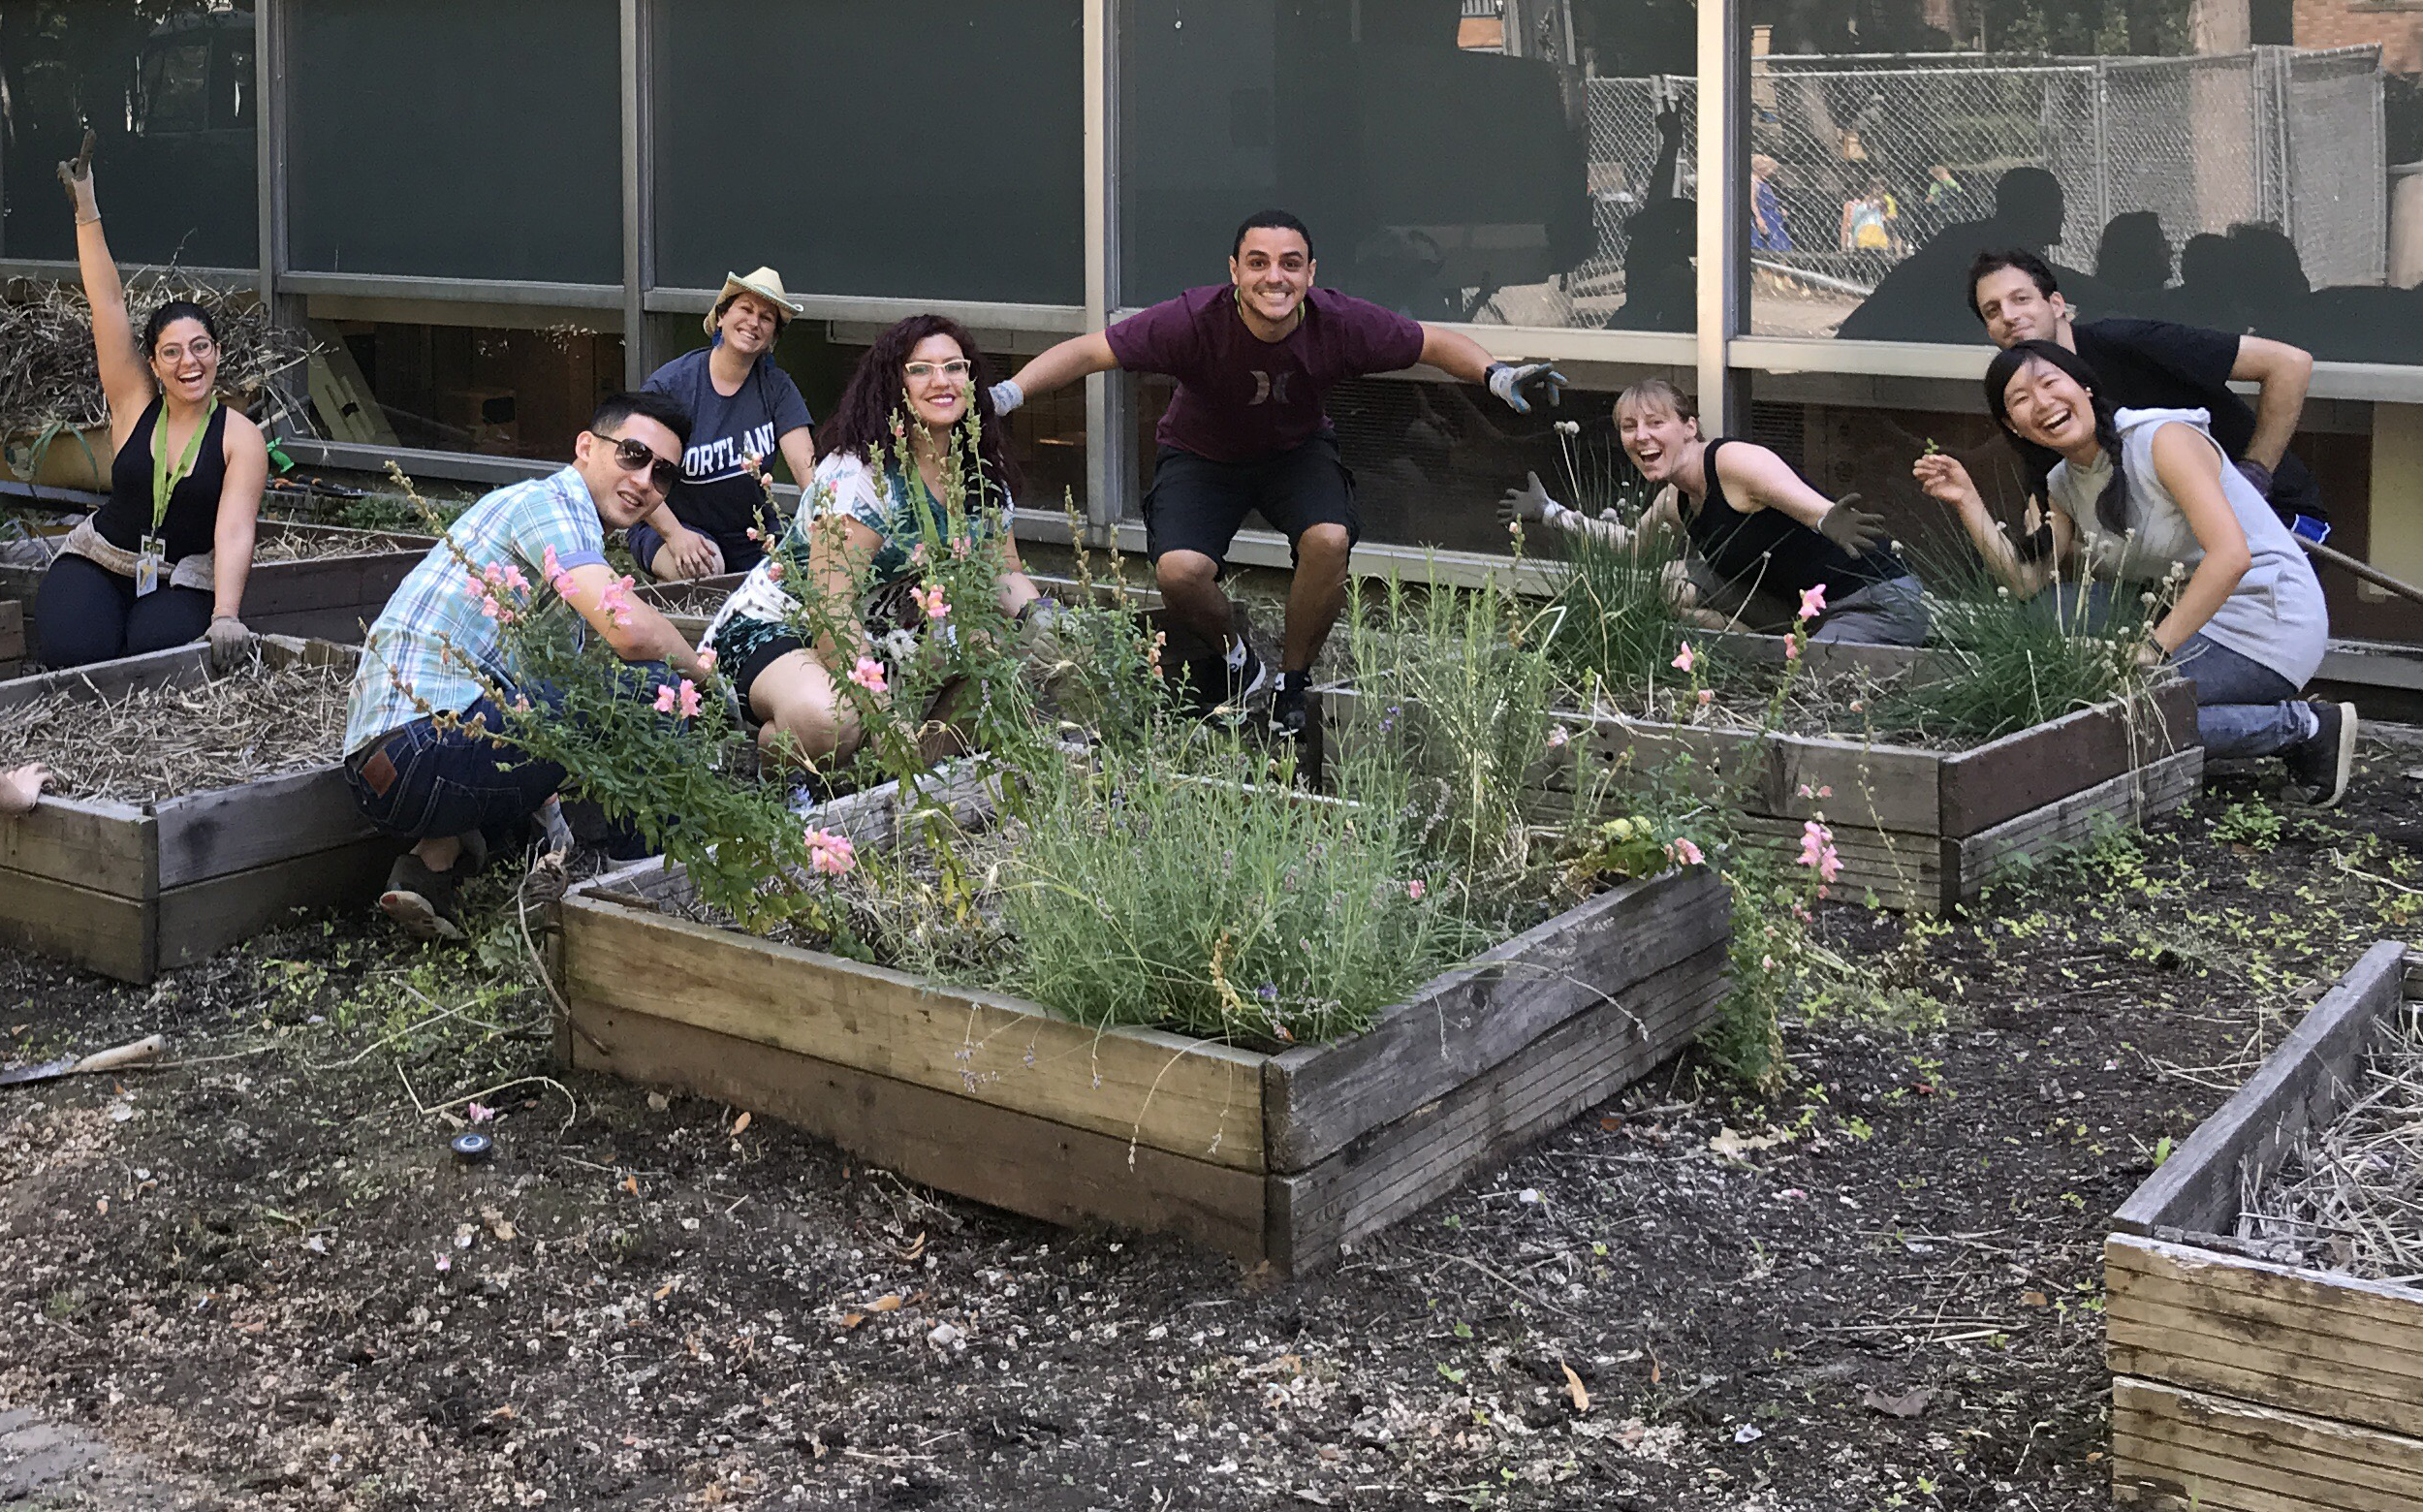 Students at Portland State University enjoy planting flower beds around the campus.